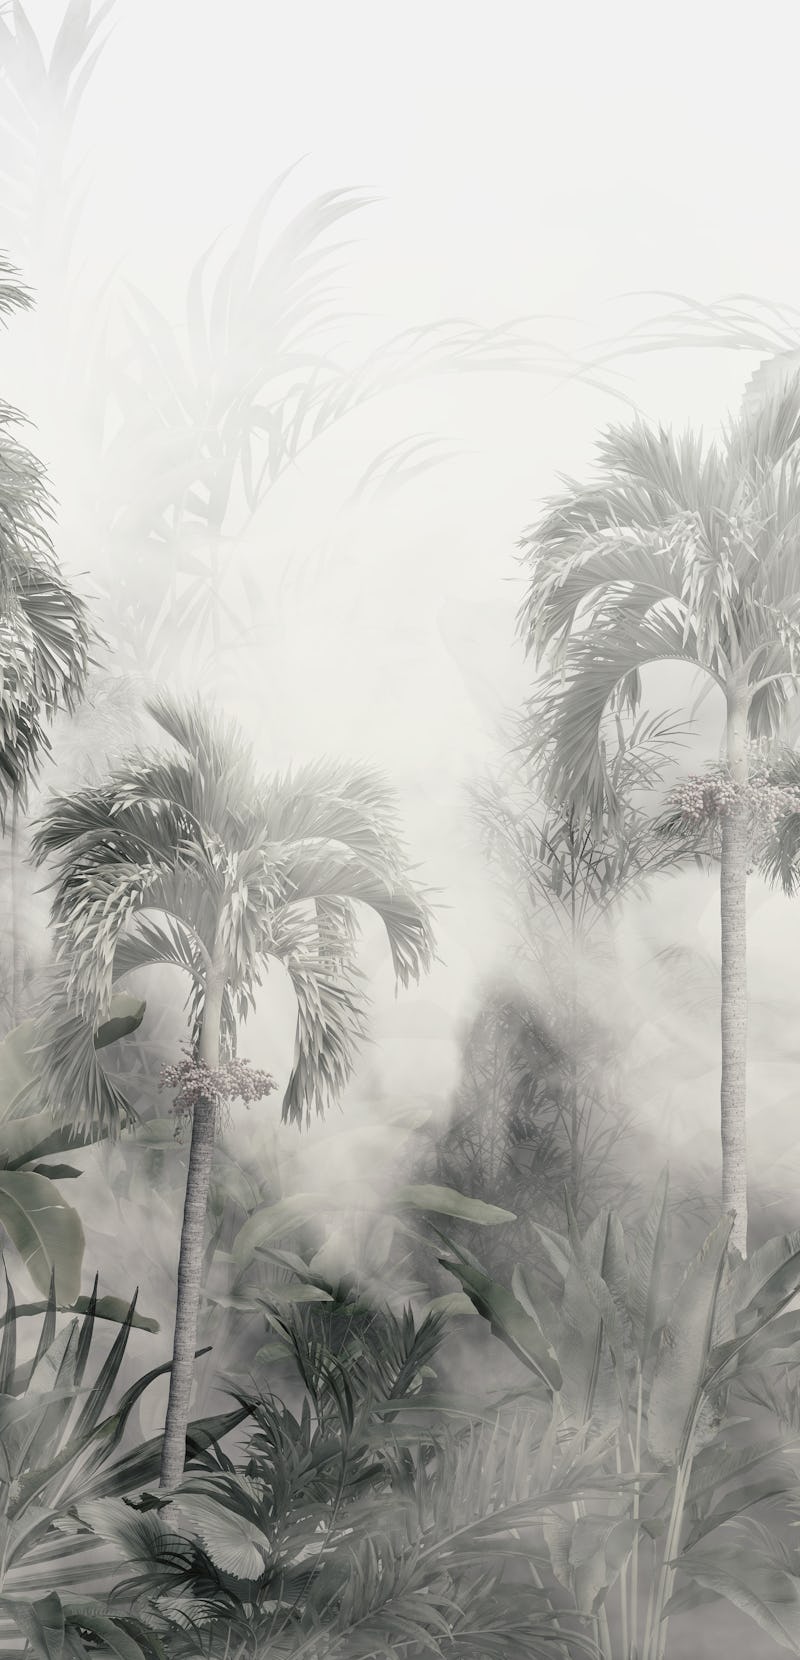 tropical trees and leaves wallpaper design in foggy forest - 3D illustration